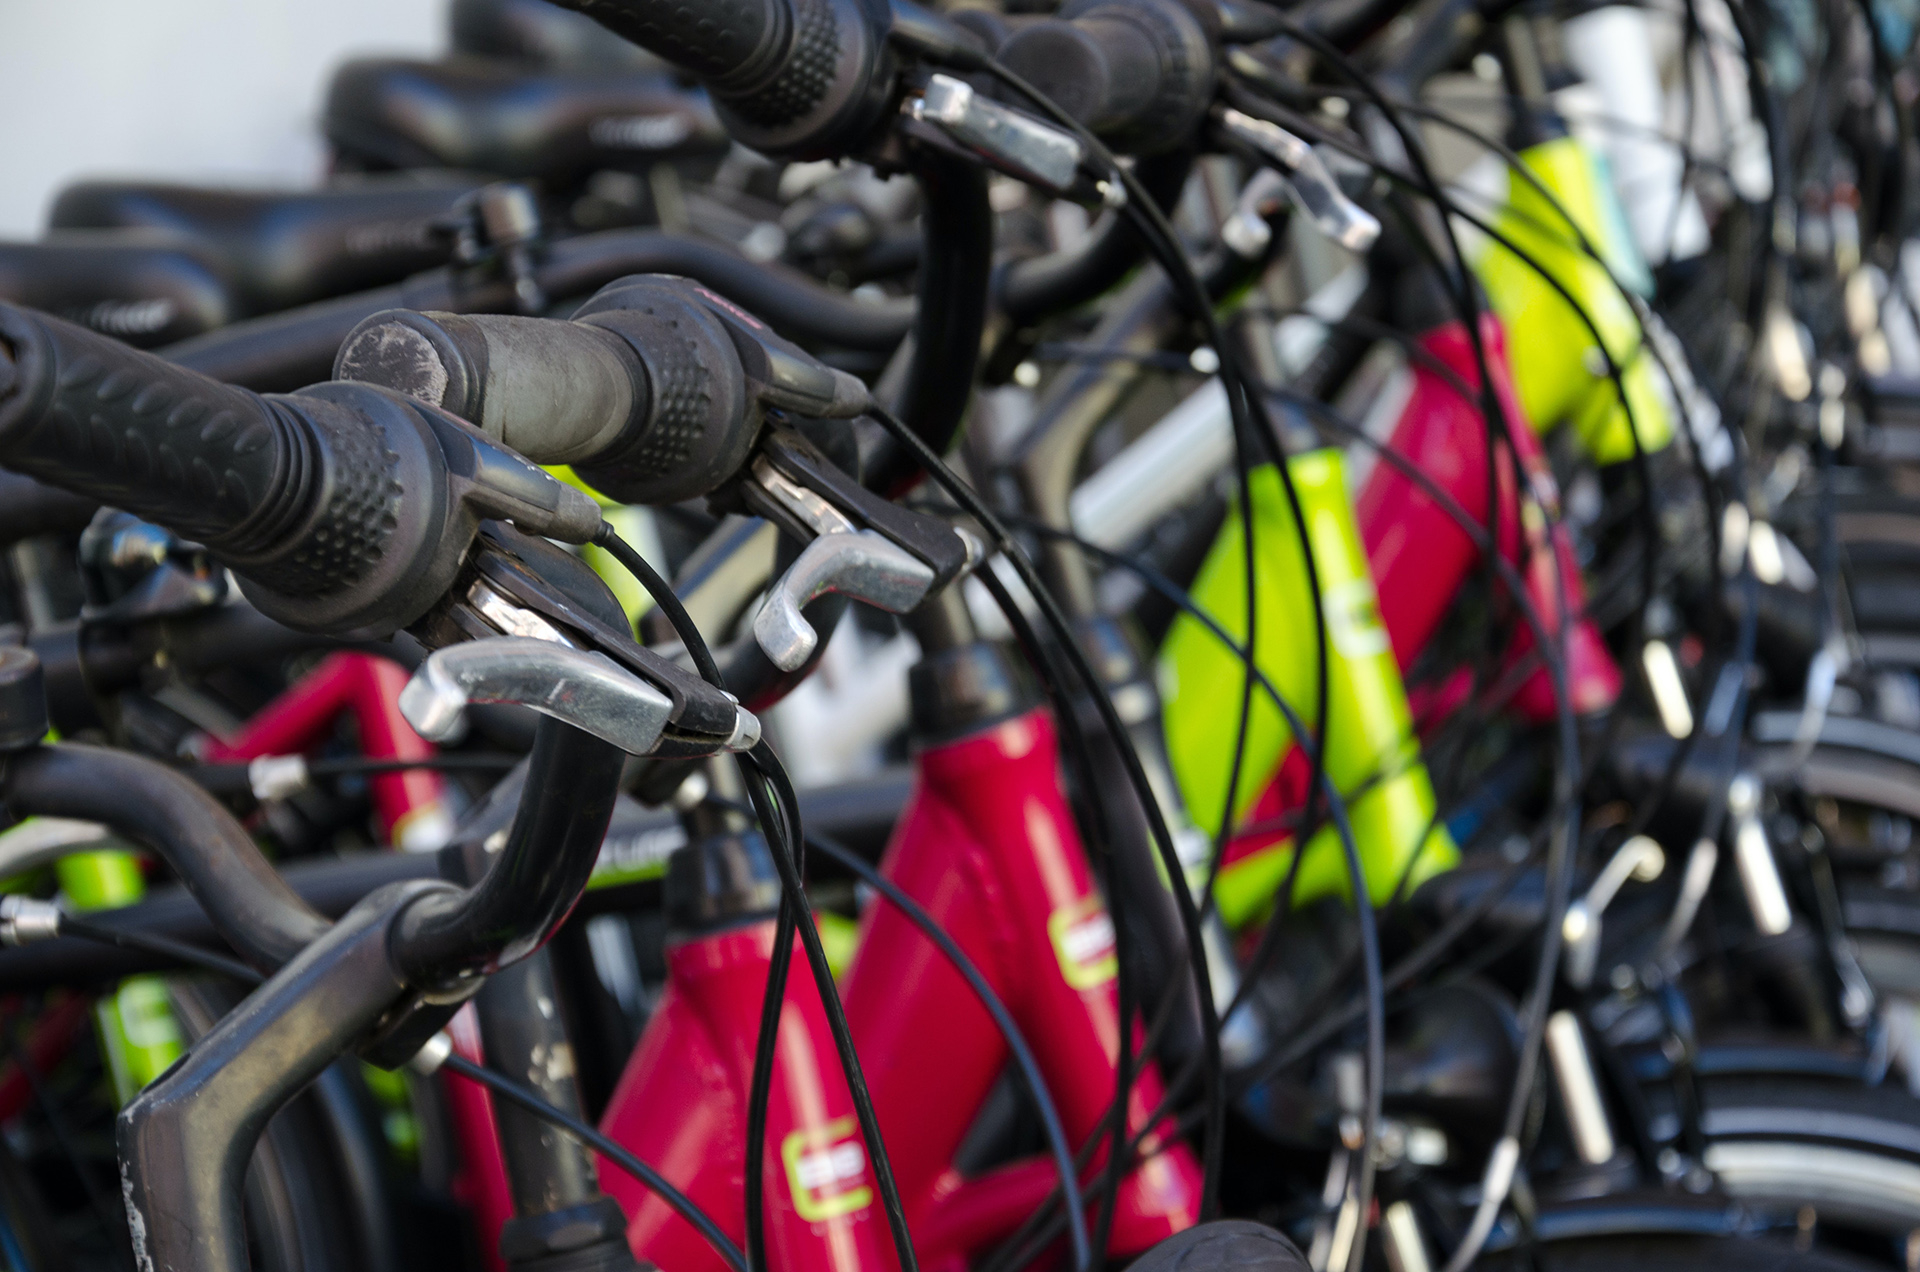 Bike rental store as a sample for renting Business Ideas